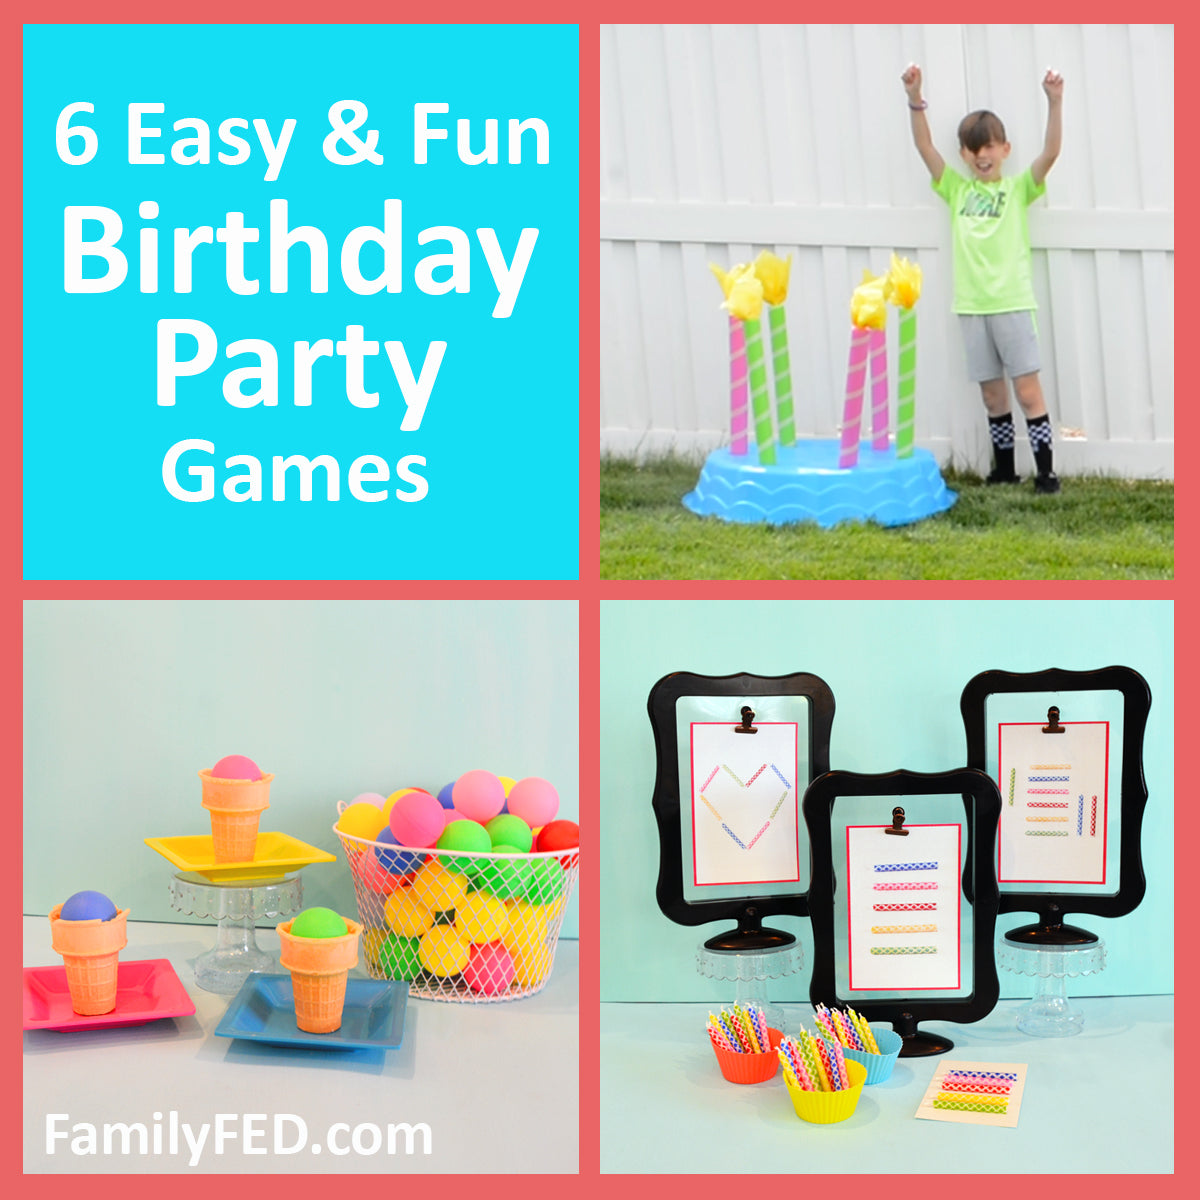 5 cool and inexpensive DIY birthday party games that you can make